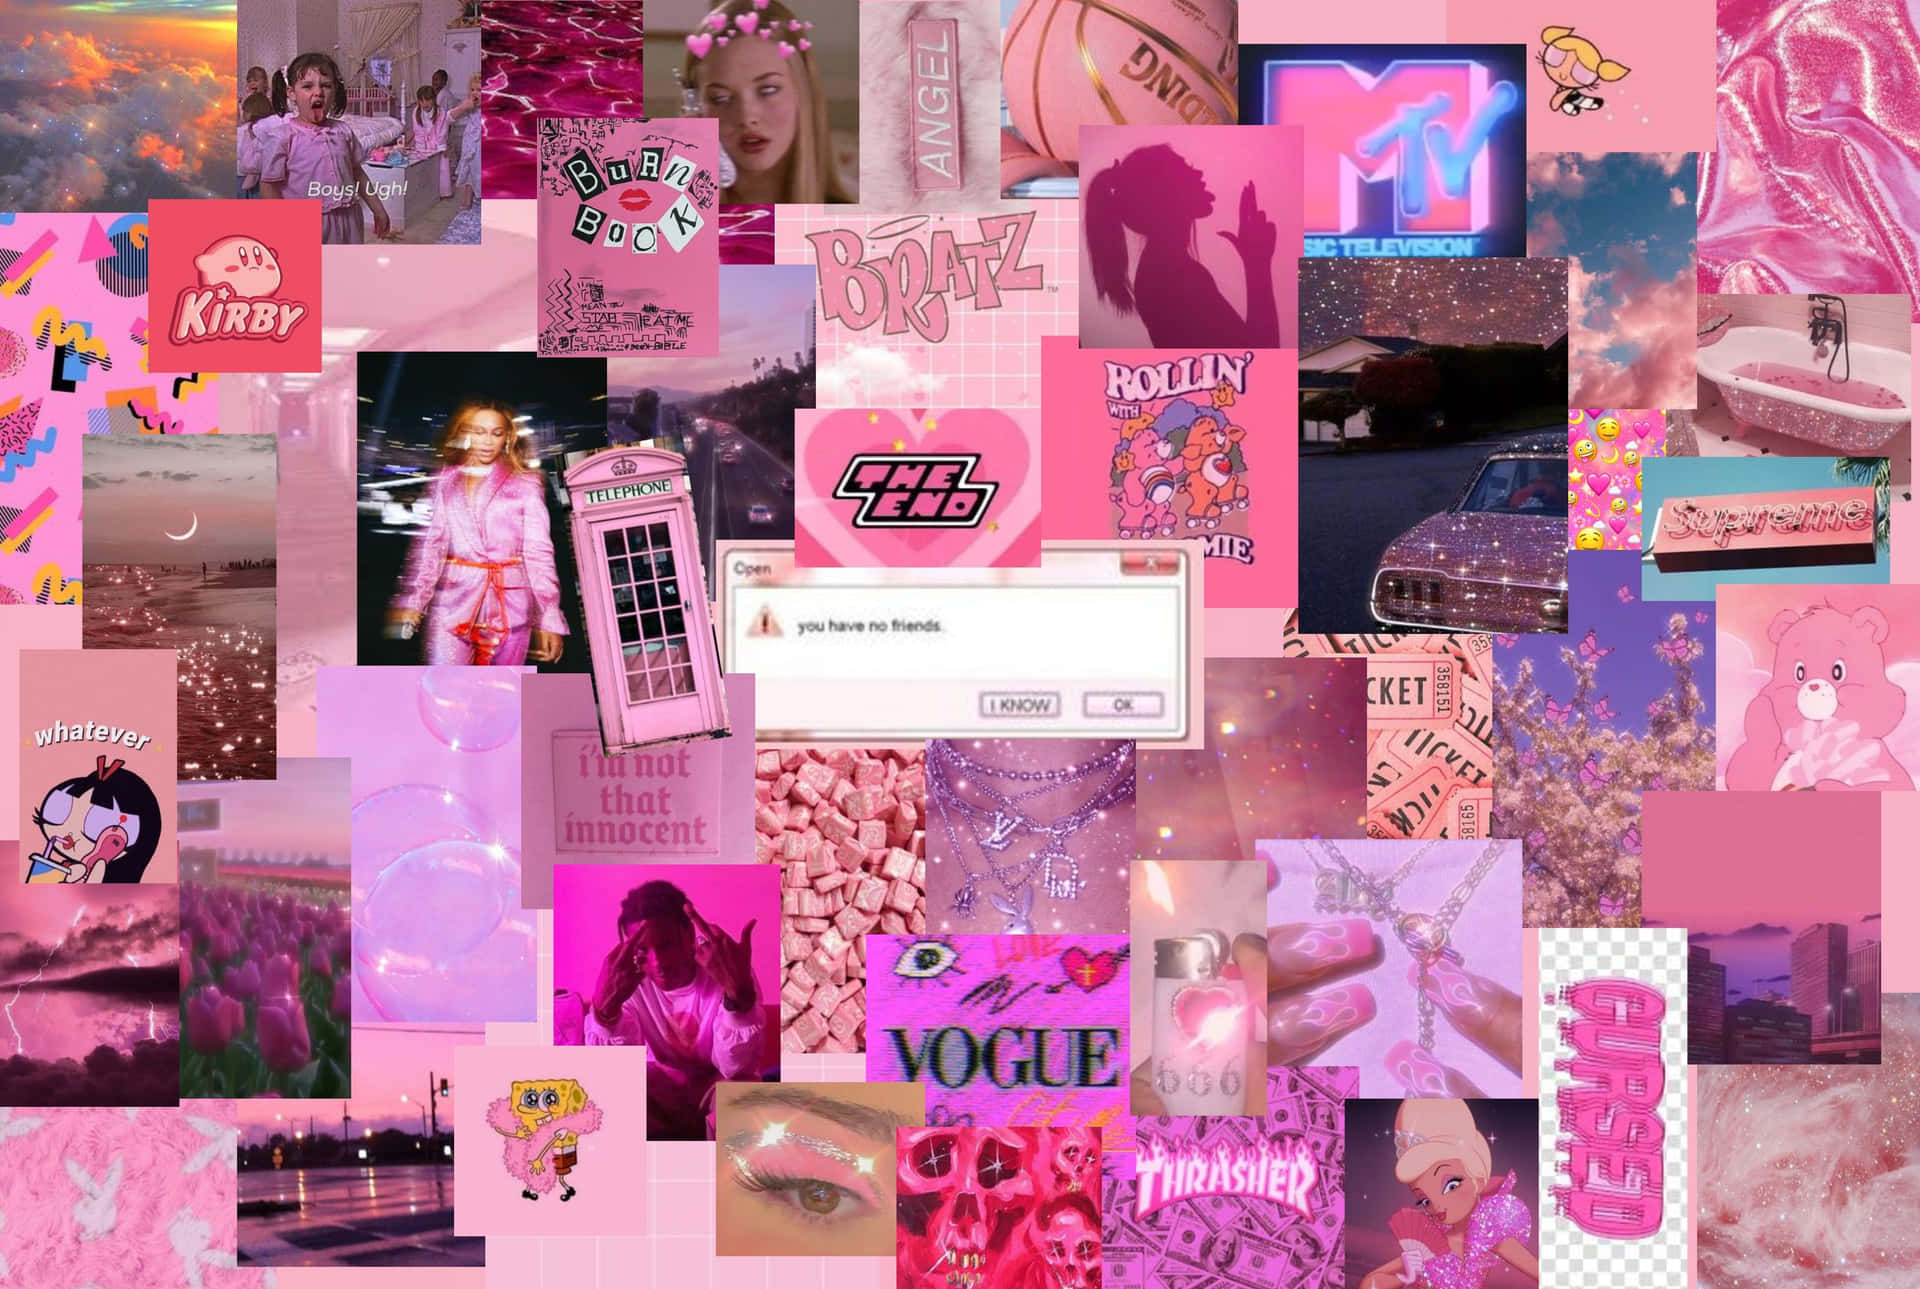 Get an edgy laptop for your everyday activities with a Grunge Pink Aesthetic. Wallpaper